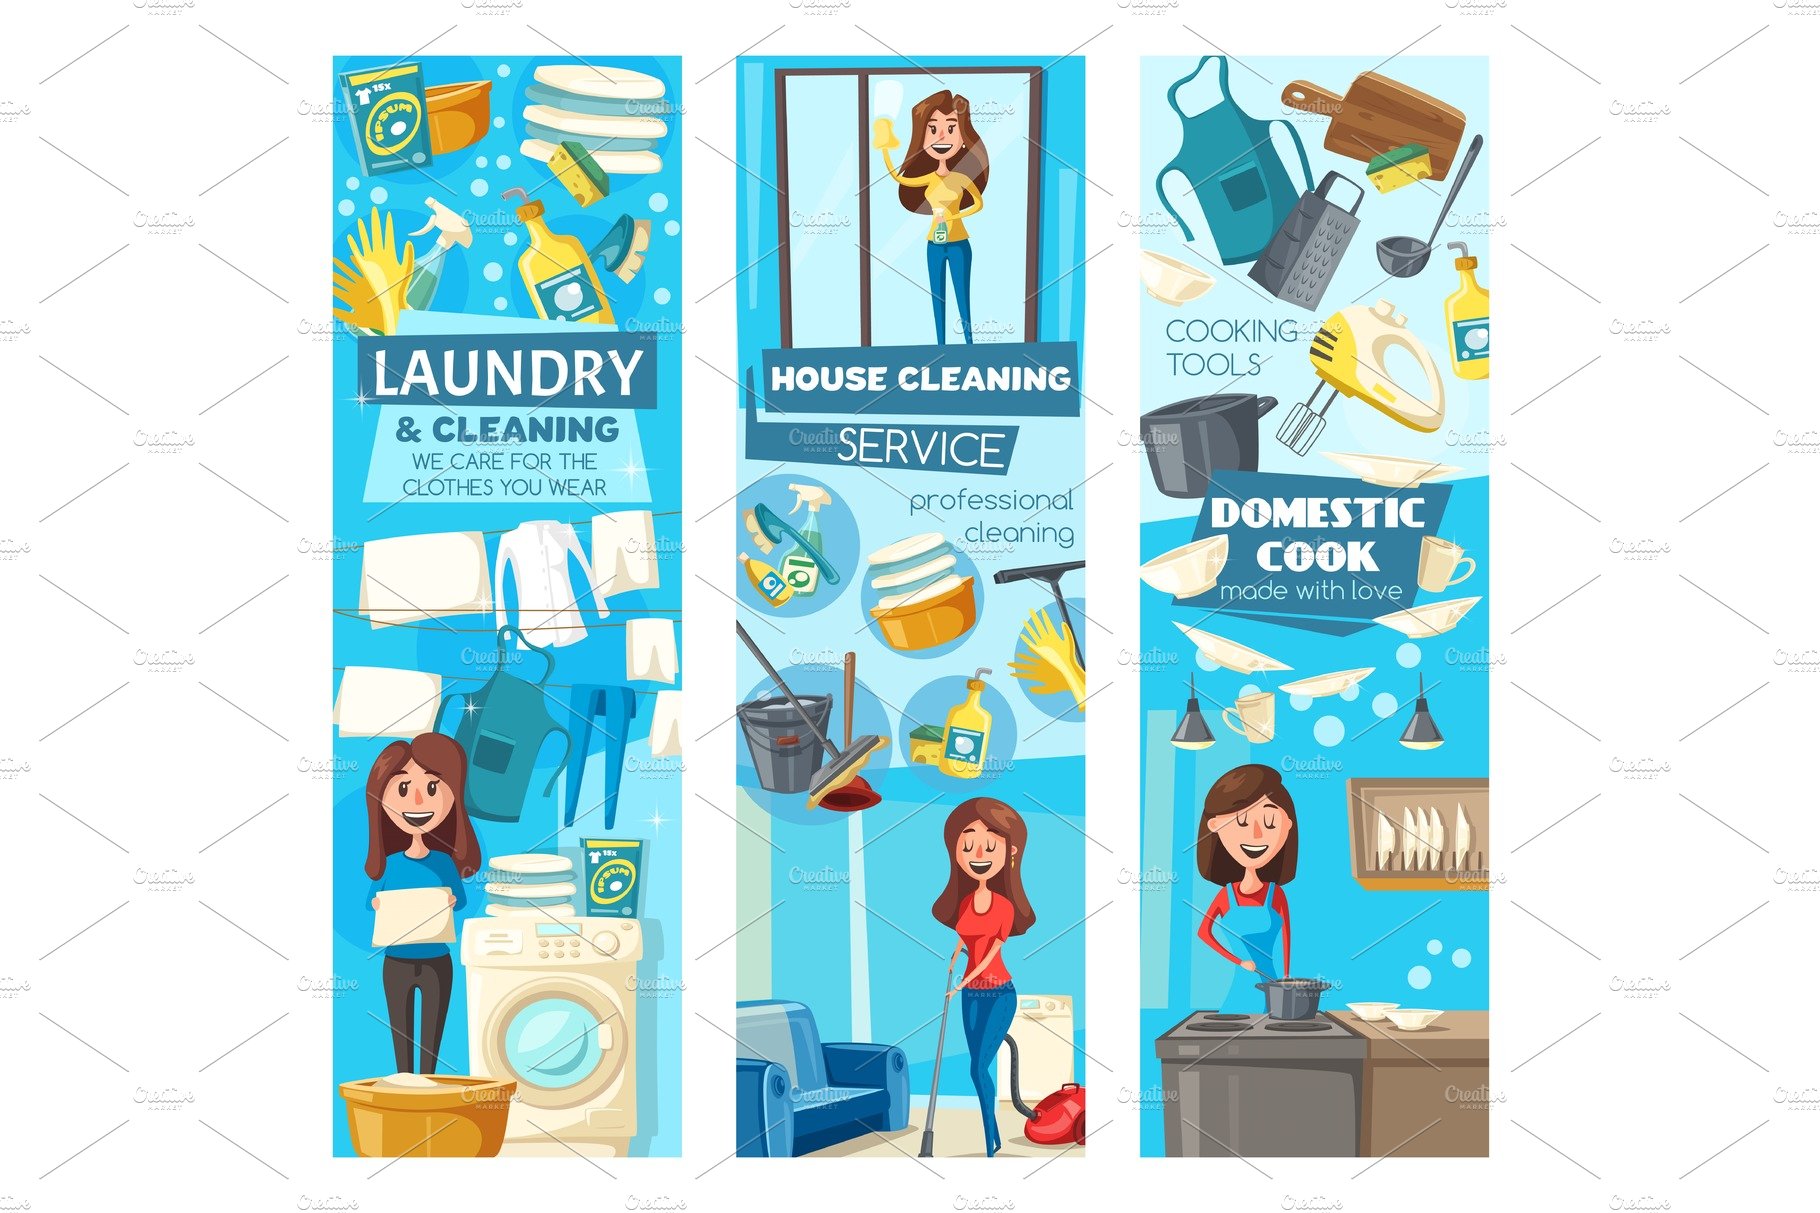 Women cleaners, cleaning service cover image.